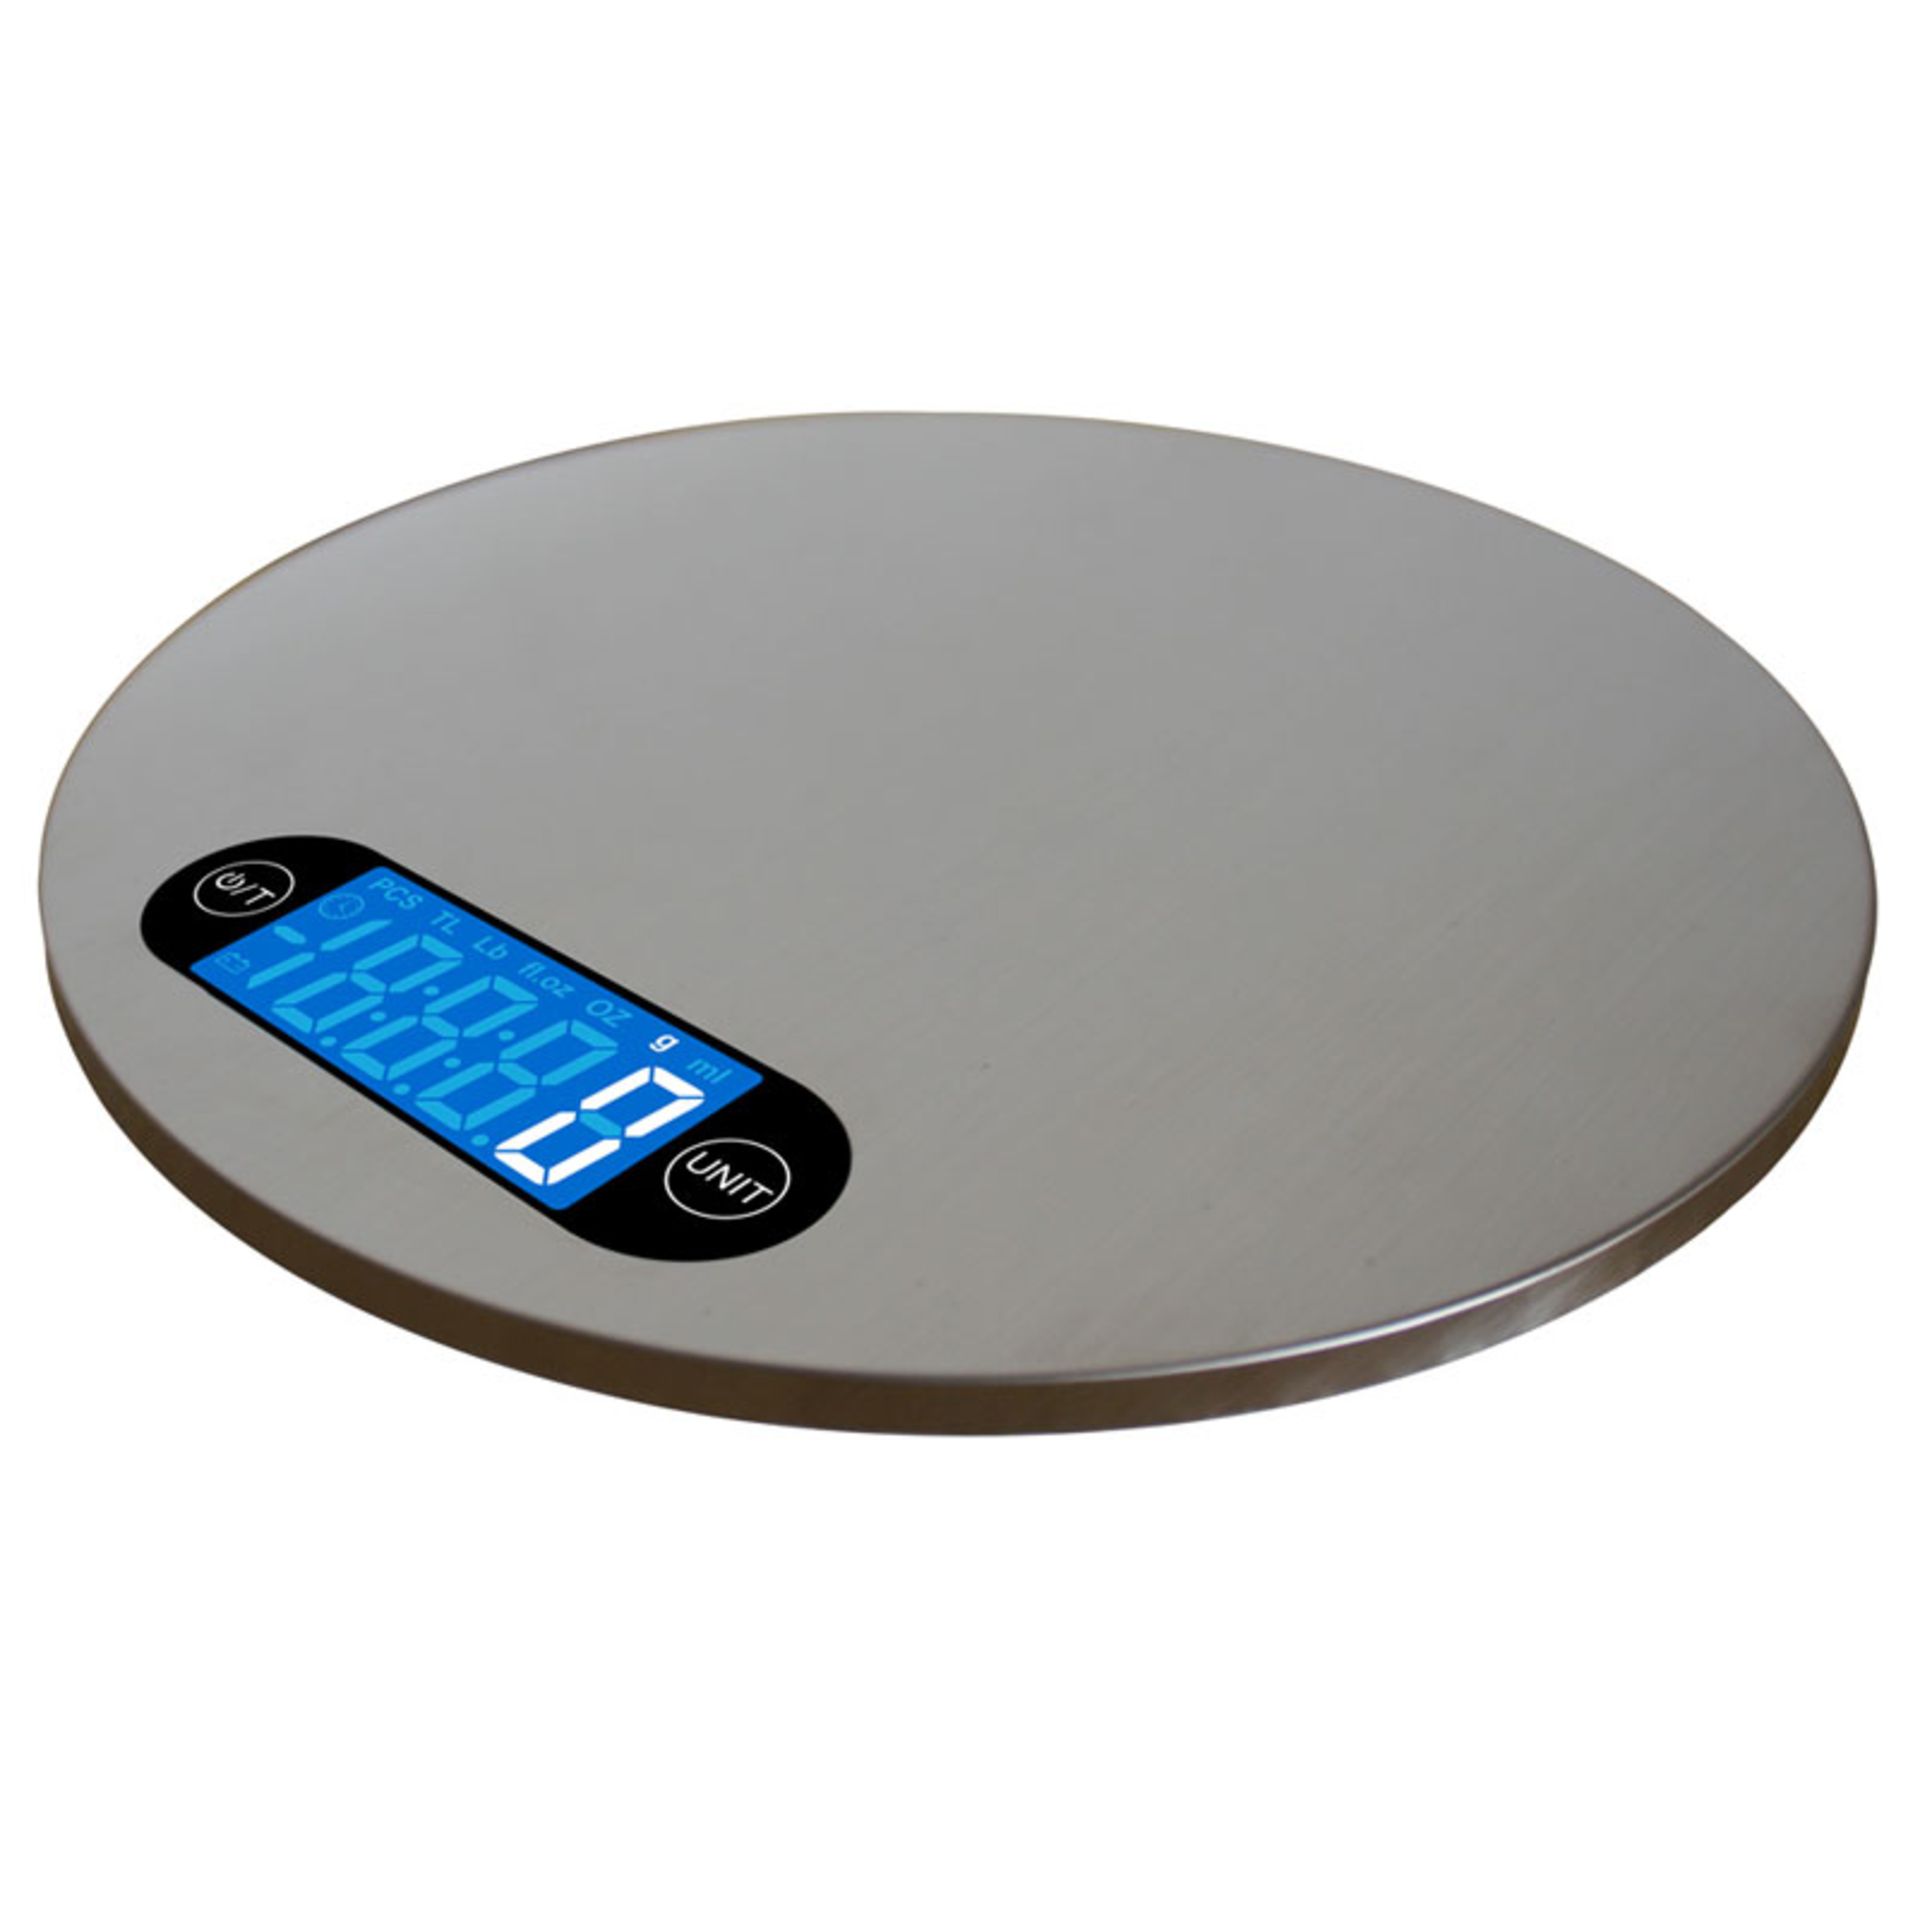 V Brand New Digital Kitchen Scales with Large LCD Display in lbs OZs and Grams (Styles may vary - Image 3 of 3